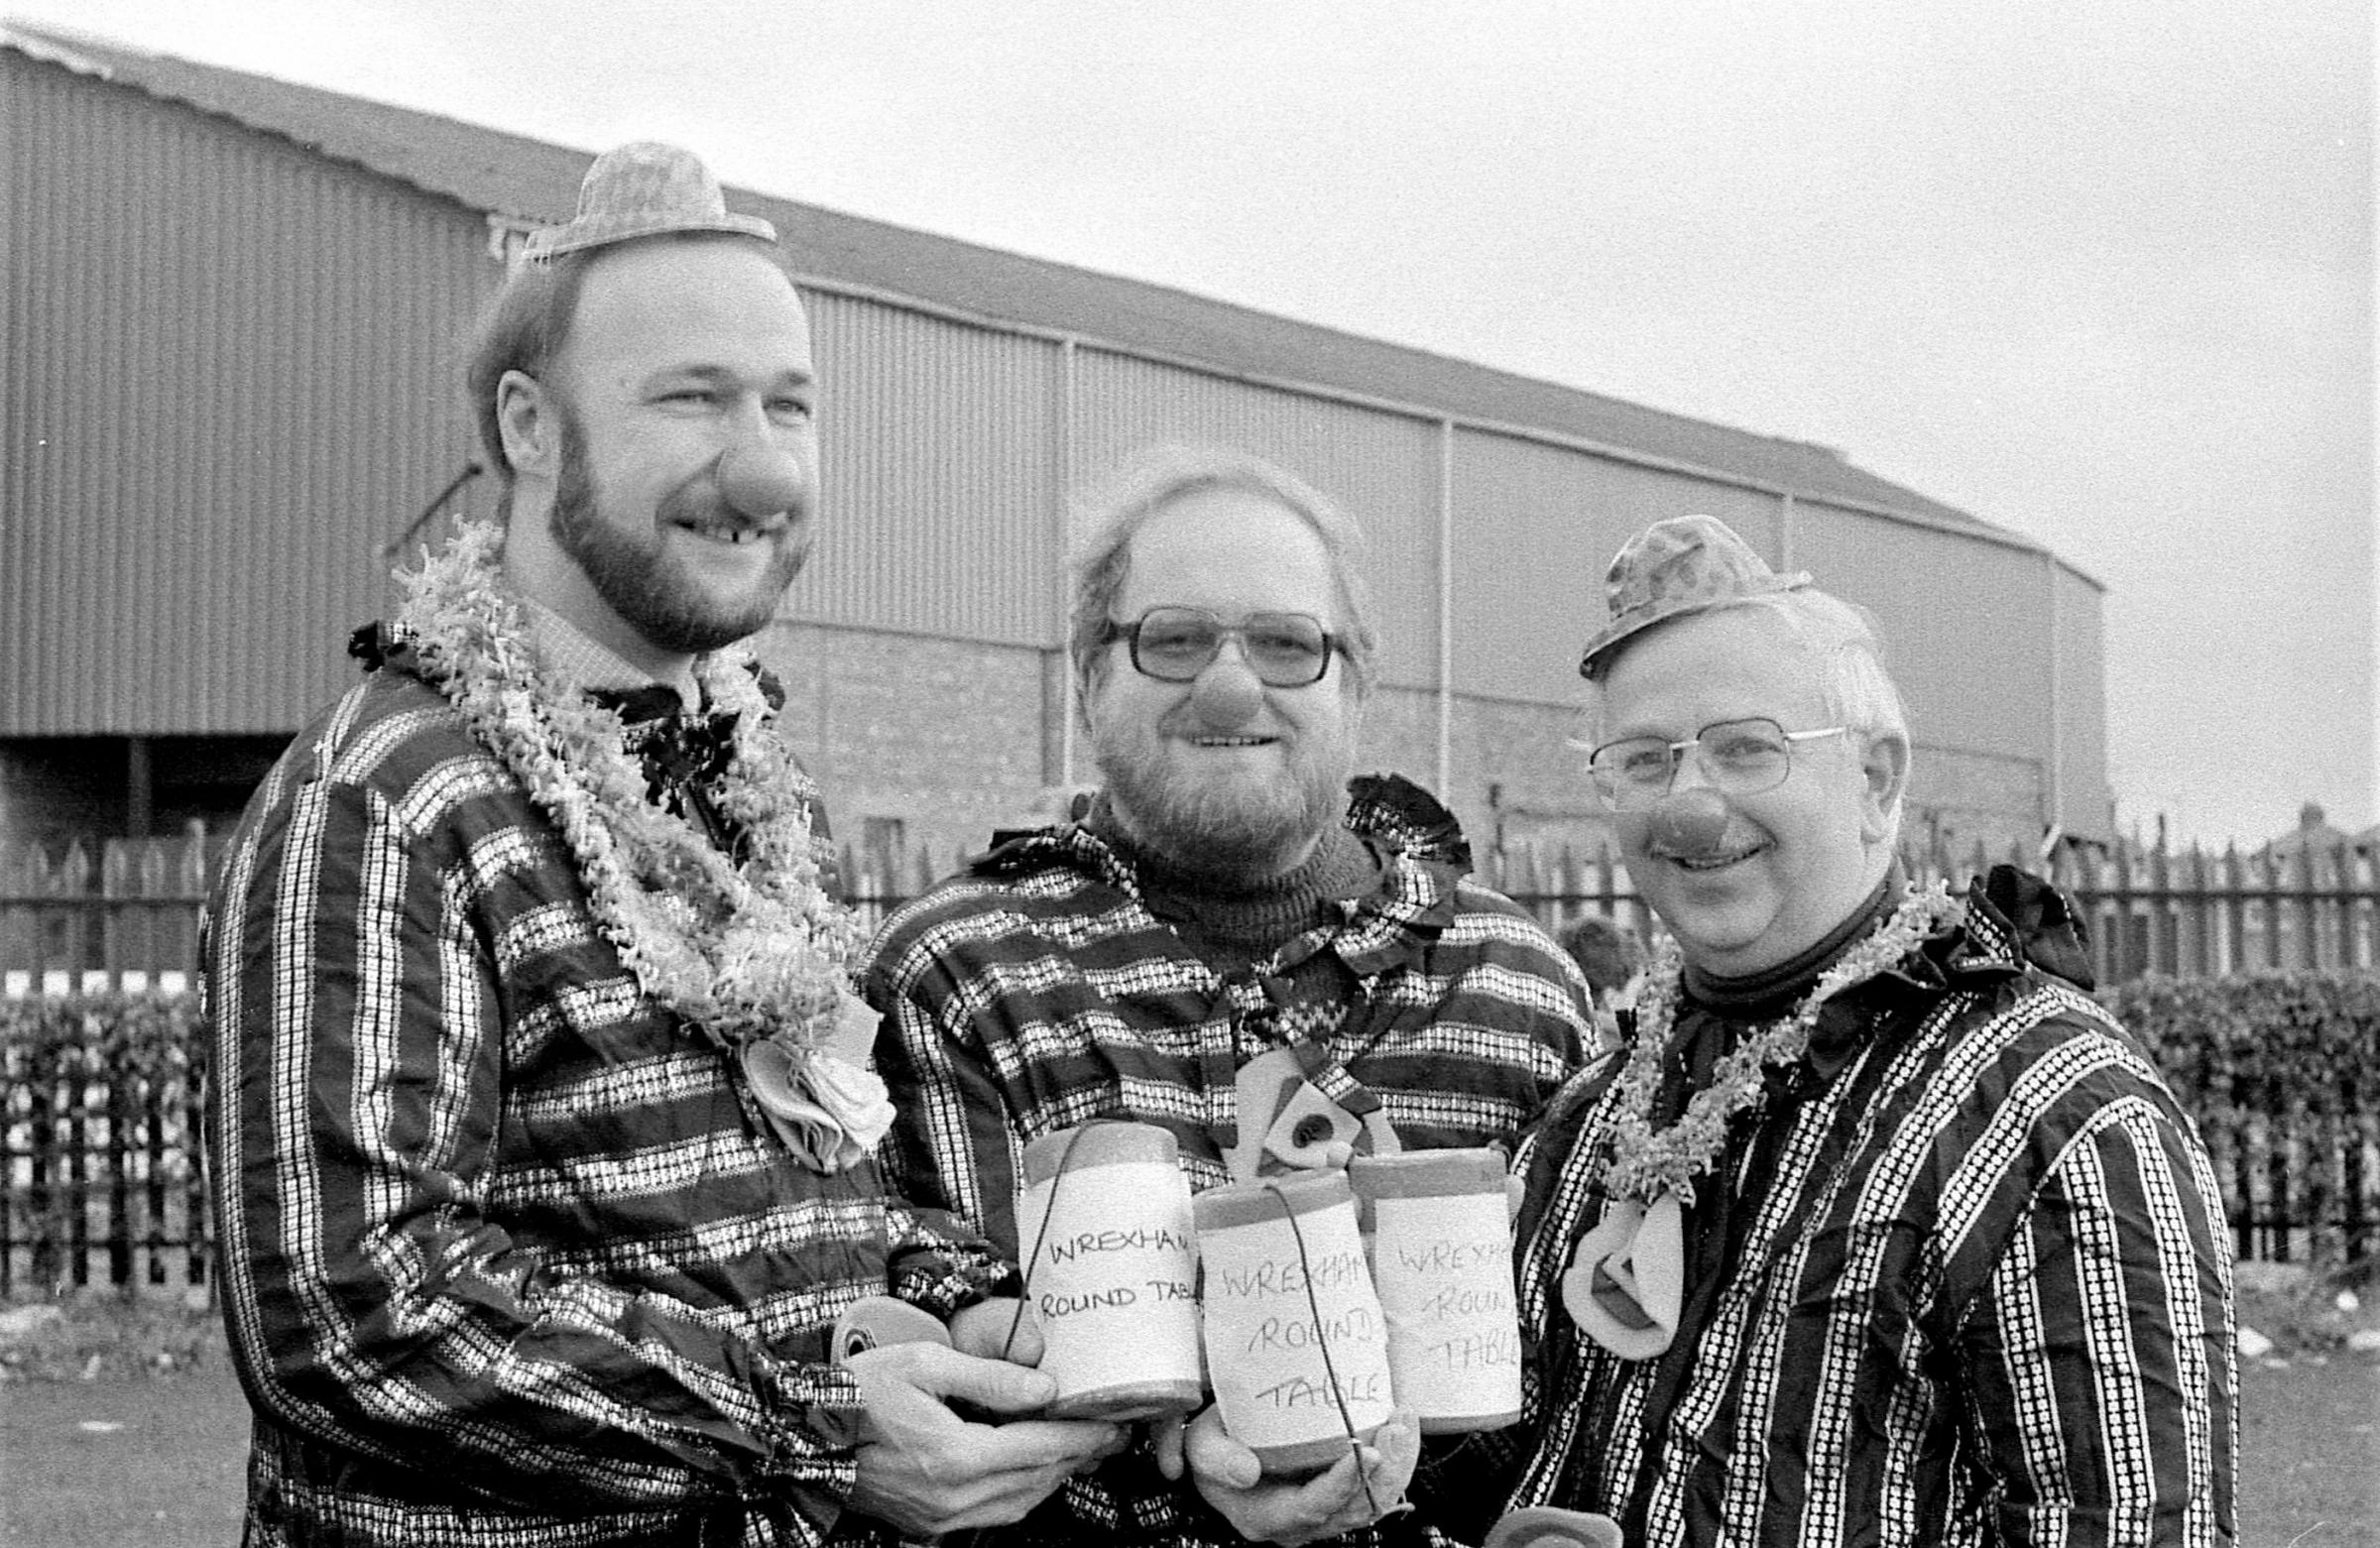 Collecting for Wrexham Round Table at the Wrexham Father Christmas parade, 1983.